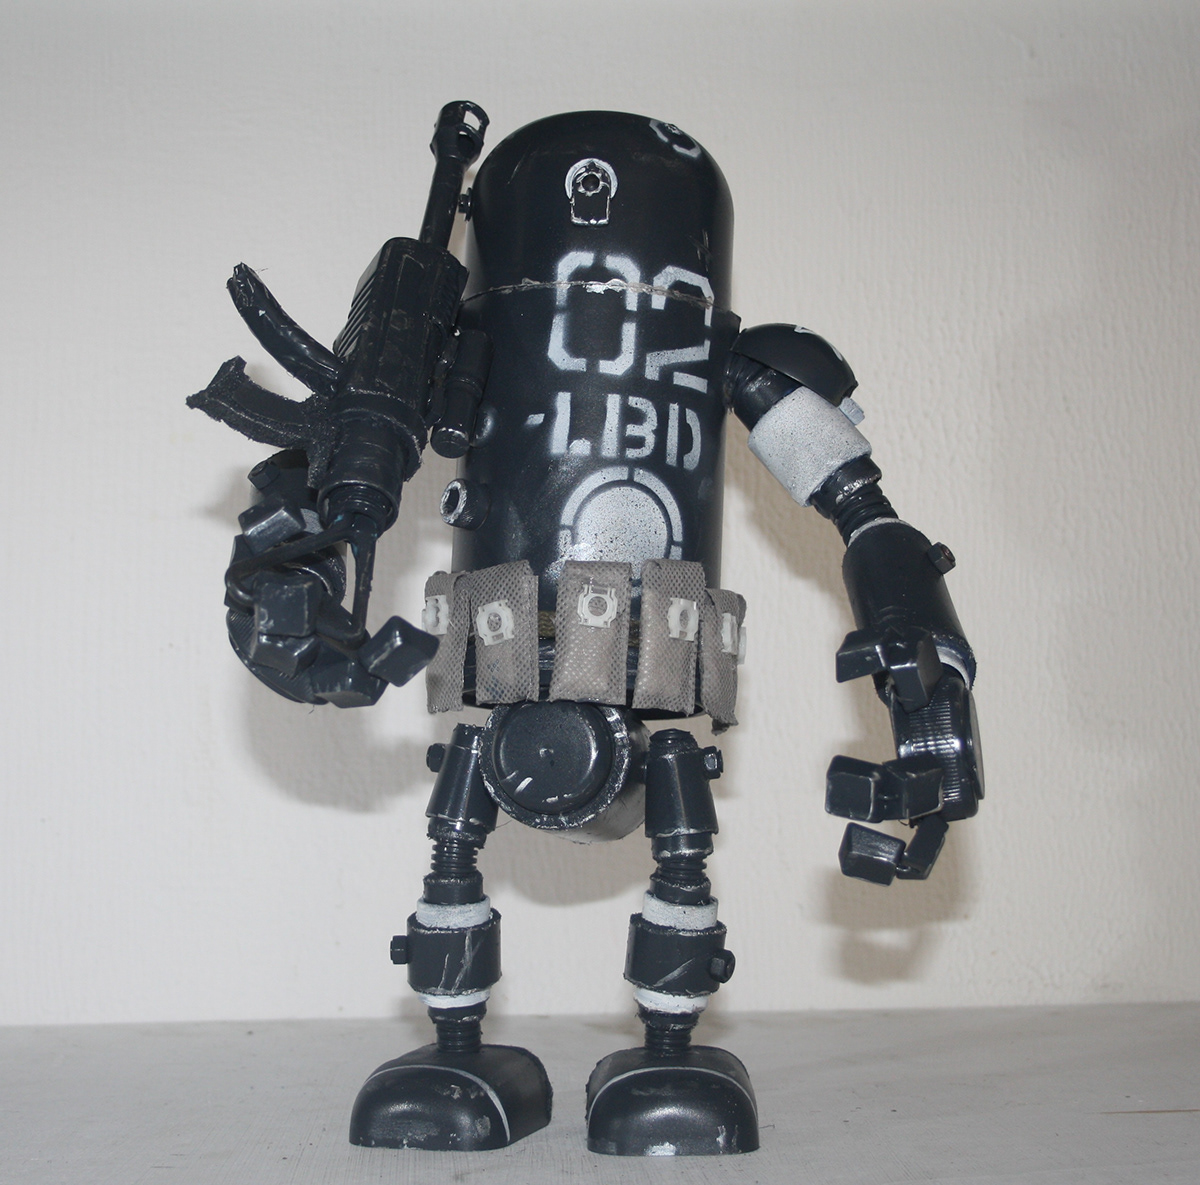 Labadanzky Ashley Wood handmade recycled material streetart robot toy